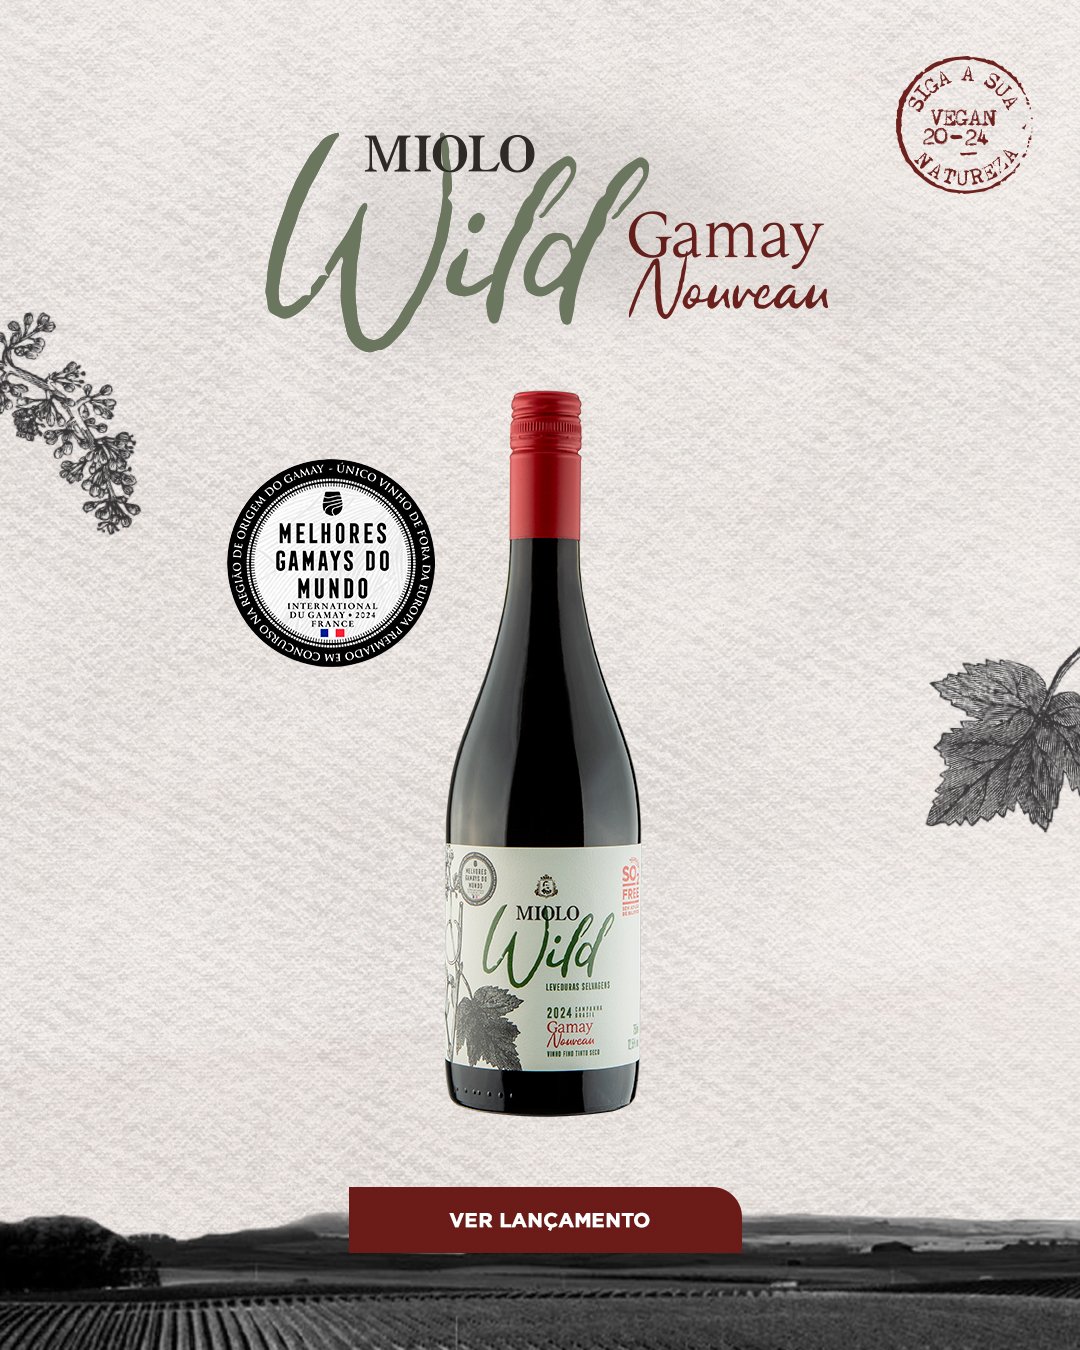 202403-ecom-miolo-gamay-home-m-1